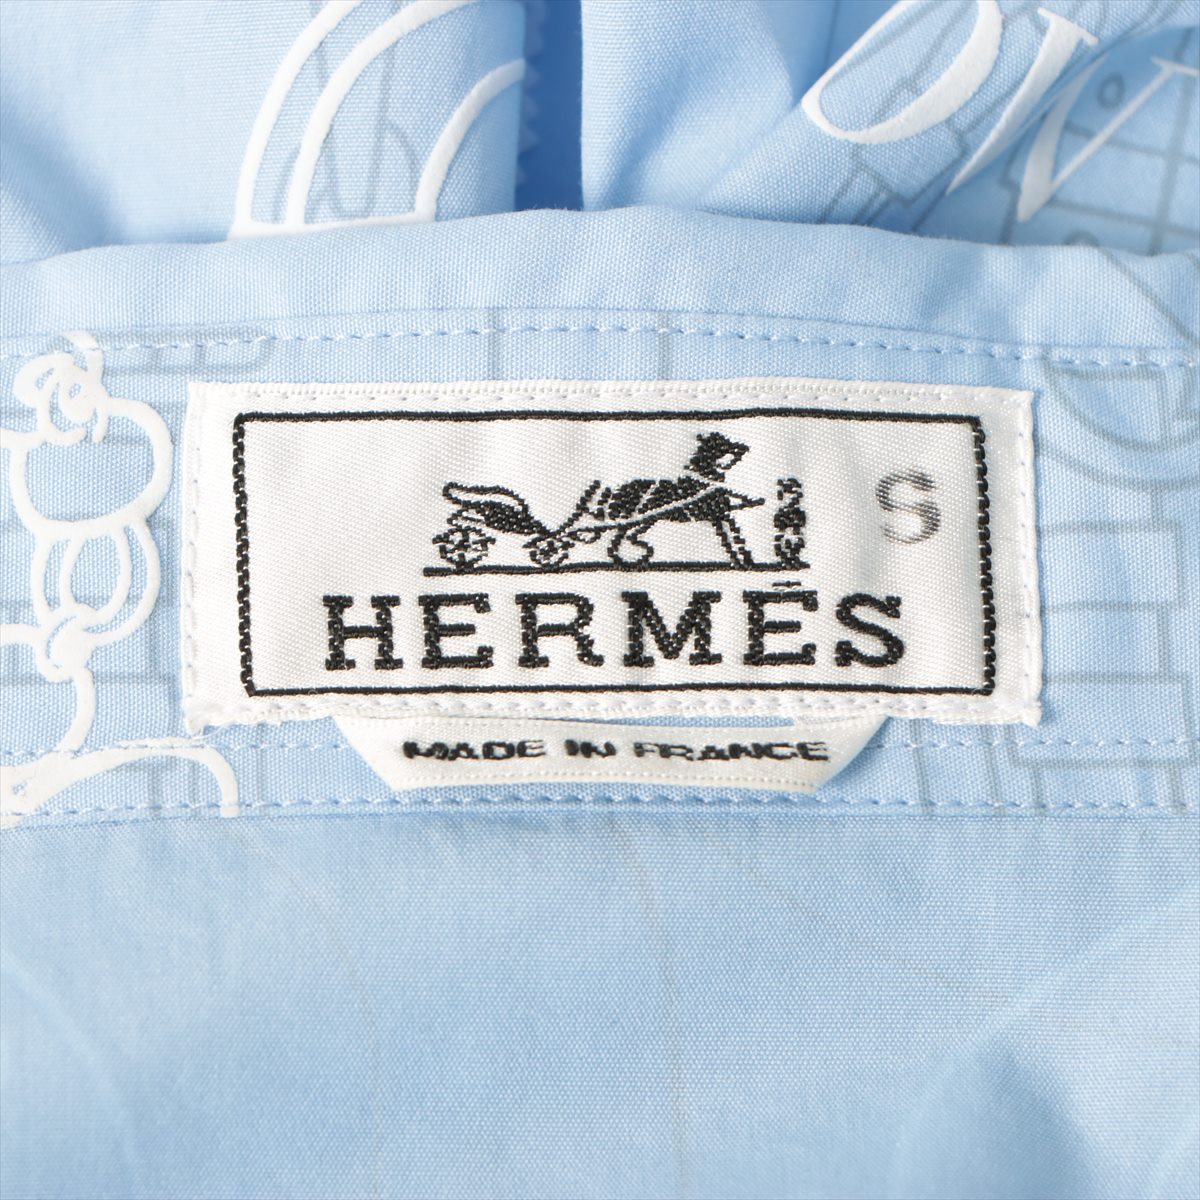 Hermès Serie Cotton Shirt 39 Men's Blue  3D printing There is an S mark